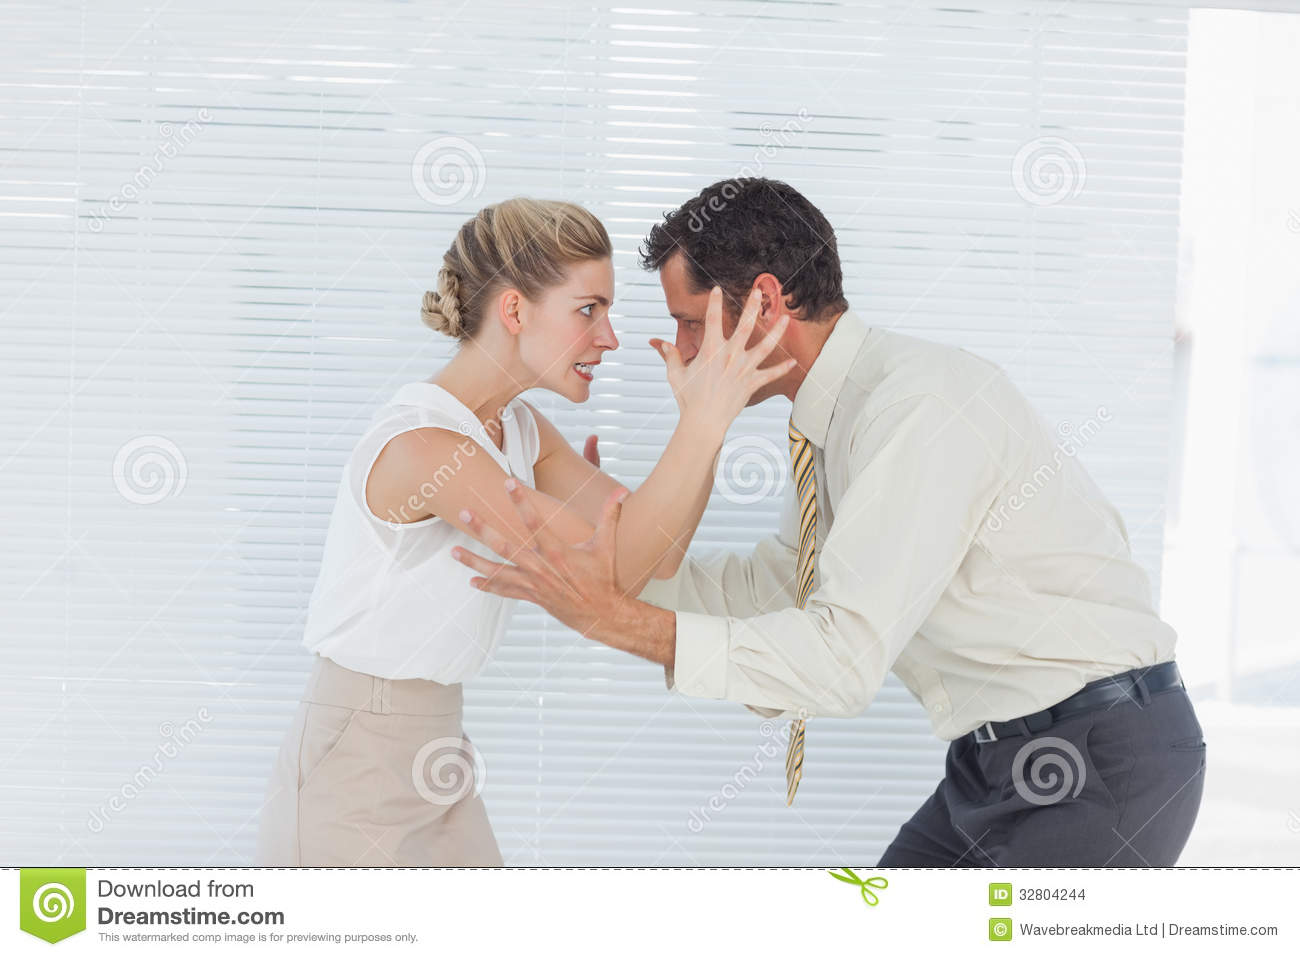 Business Team Having Heated Argument Stock Images   Image  32804244